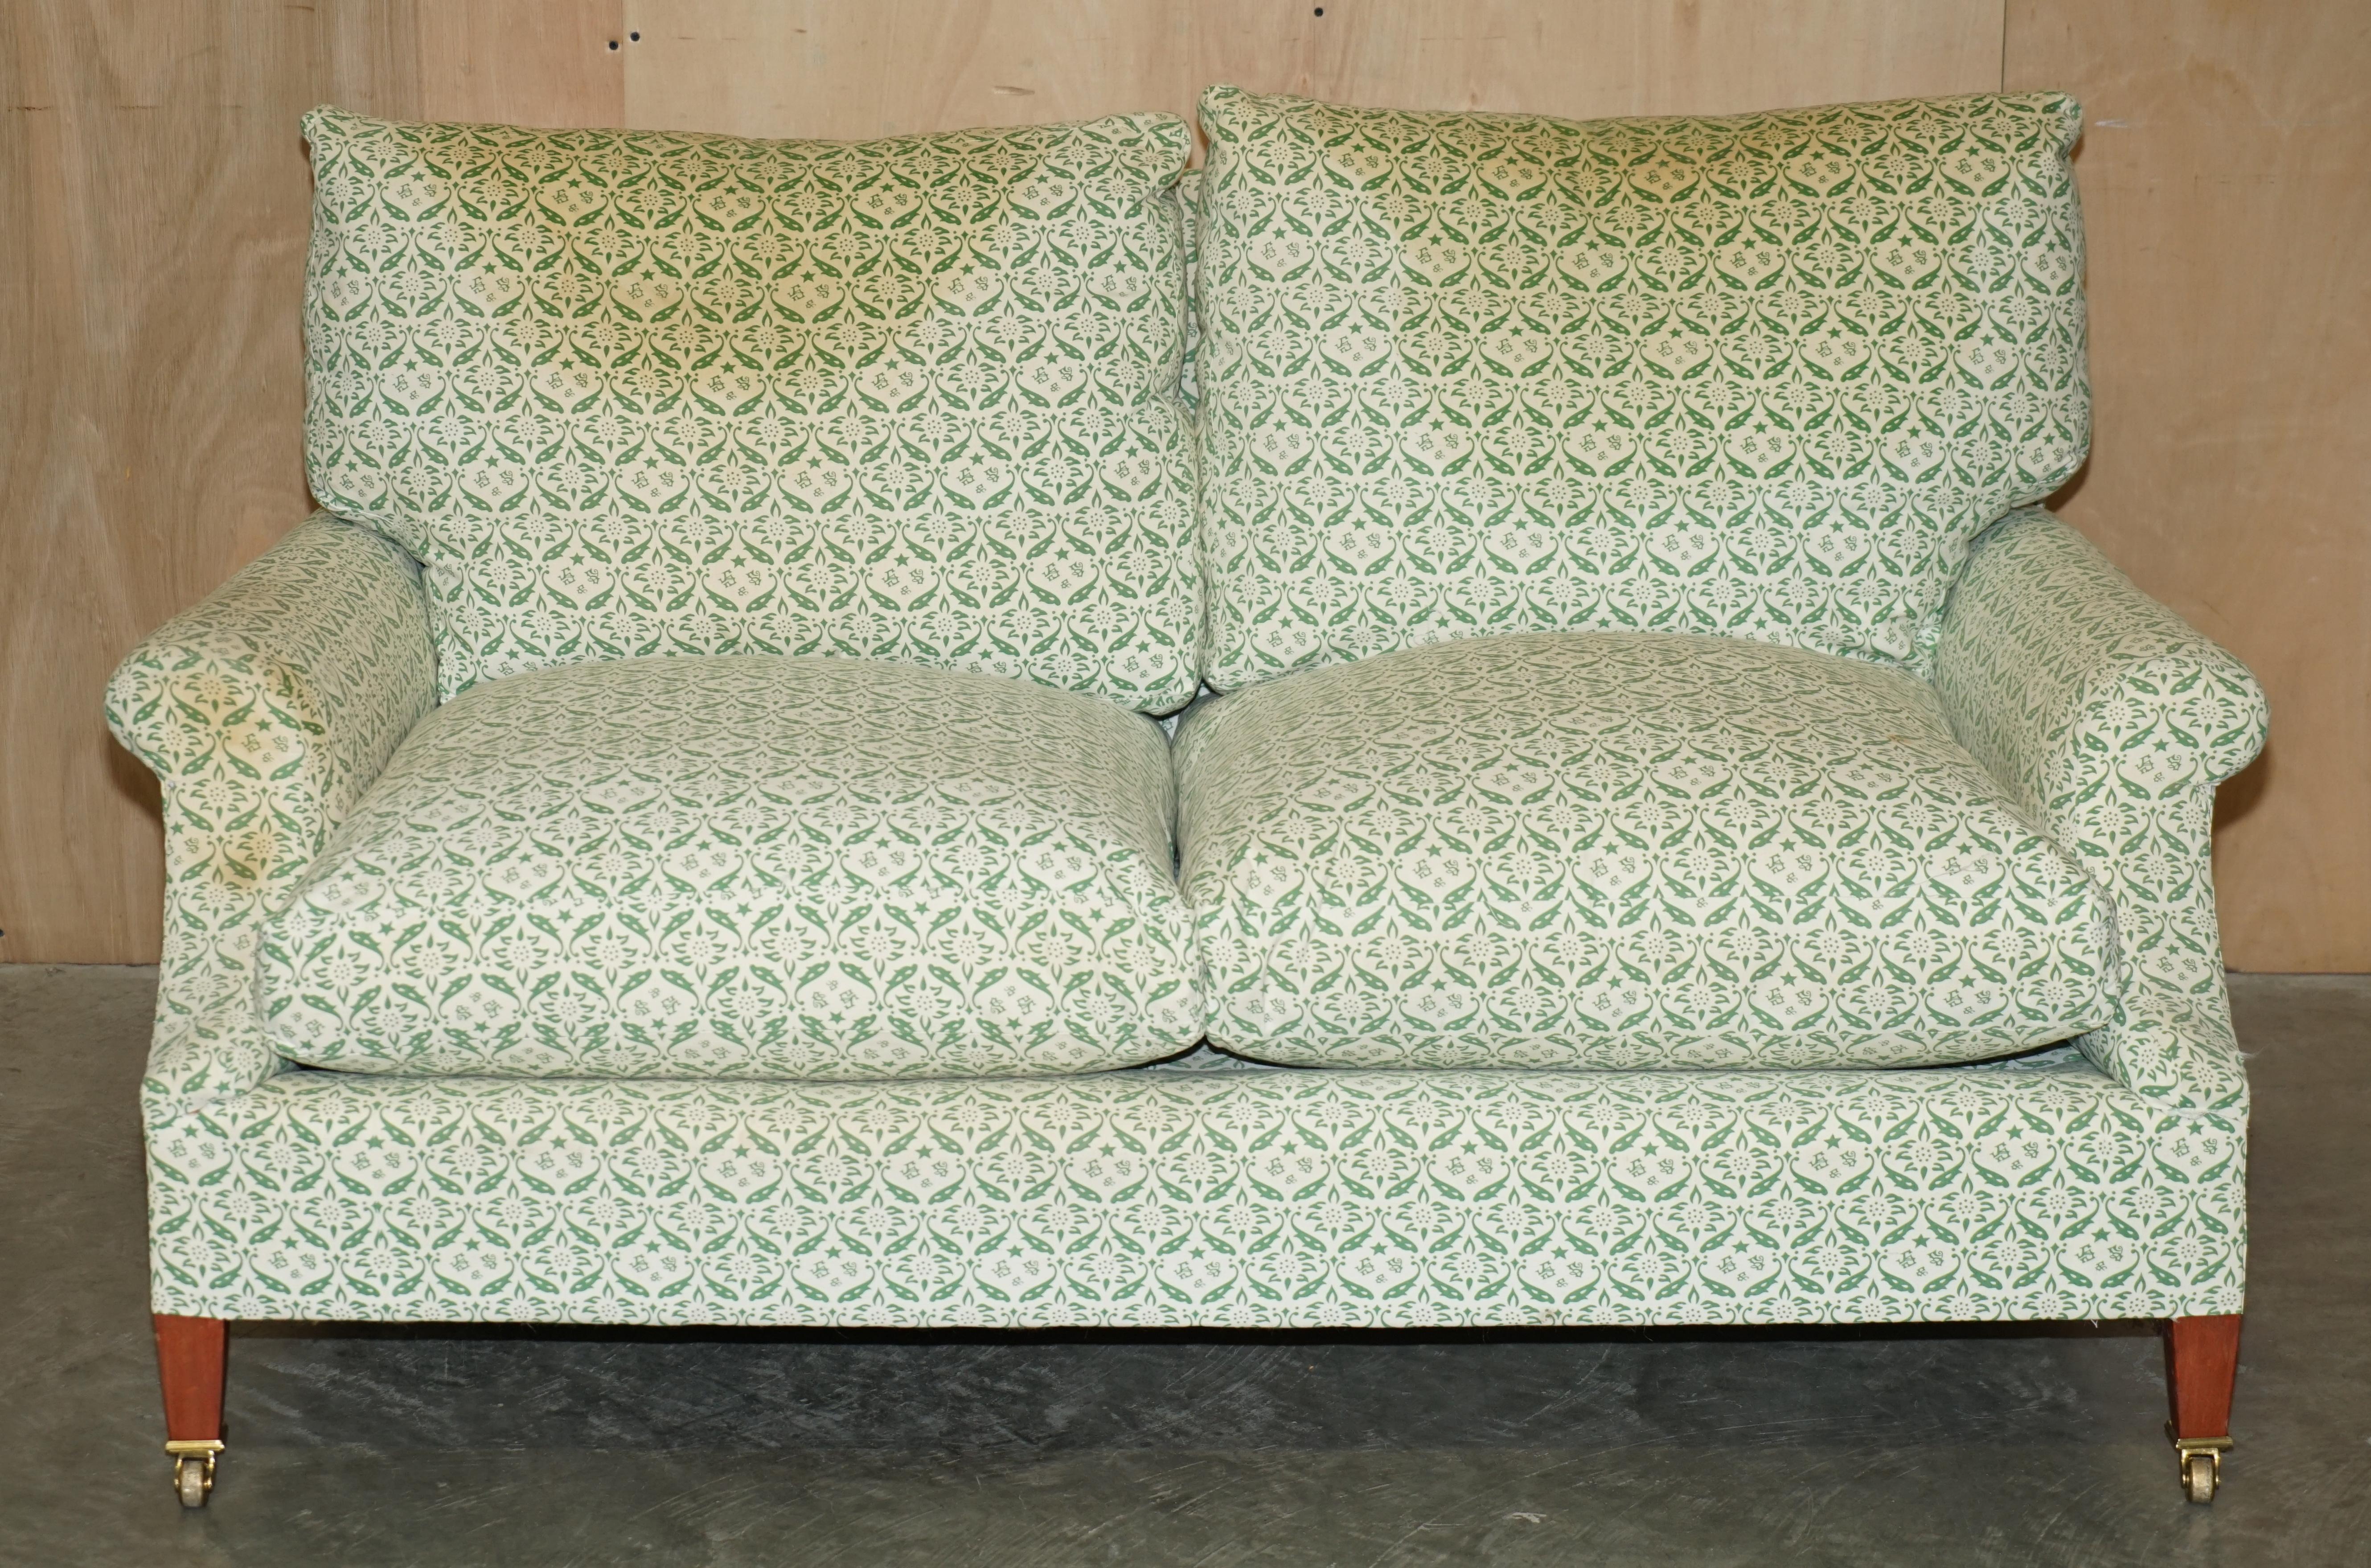 We are delighted to offer for sale this collectable Howard & Son’s Chairs LTD sofa with the original ticking fabric and overstuffed feather filled cushions 

The sofa retains all the original features, the coil sprung base, the factory ticking